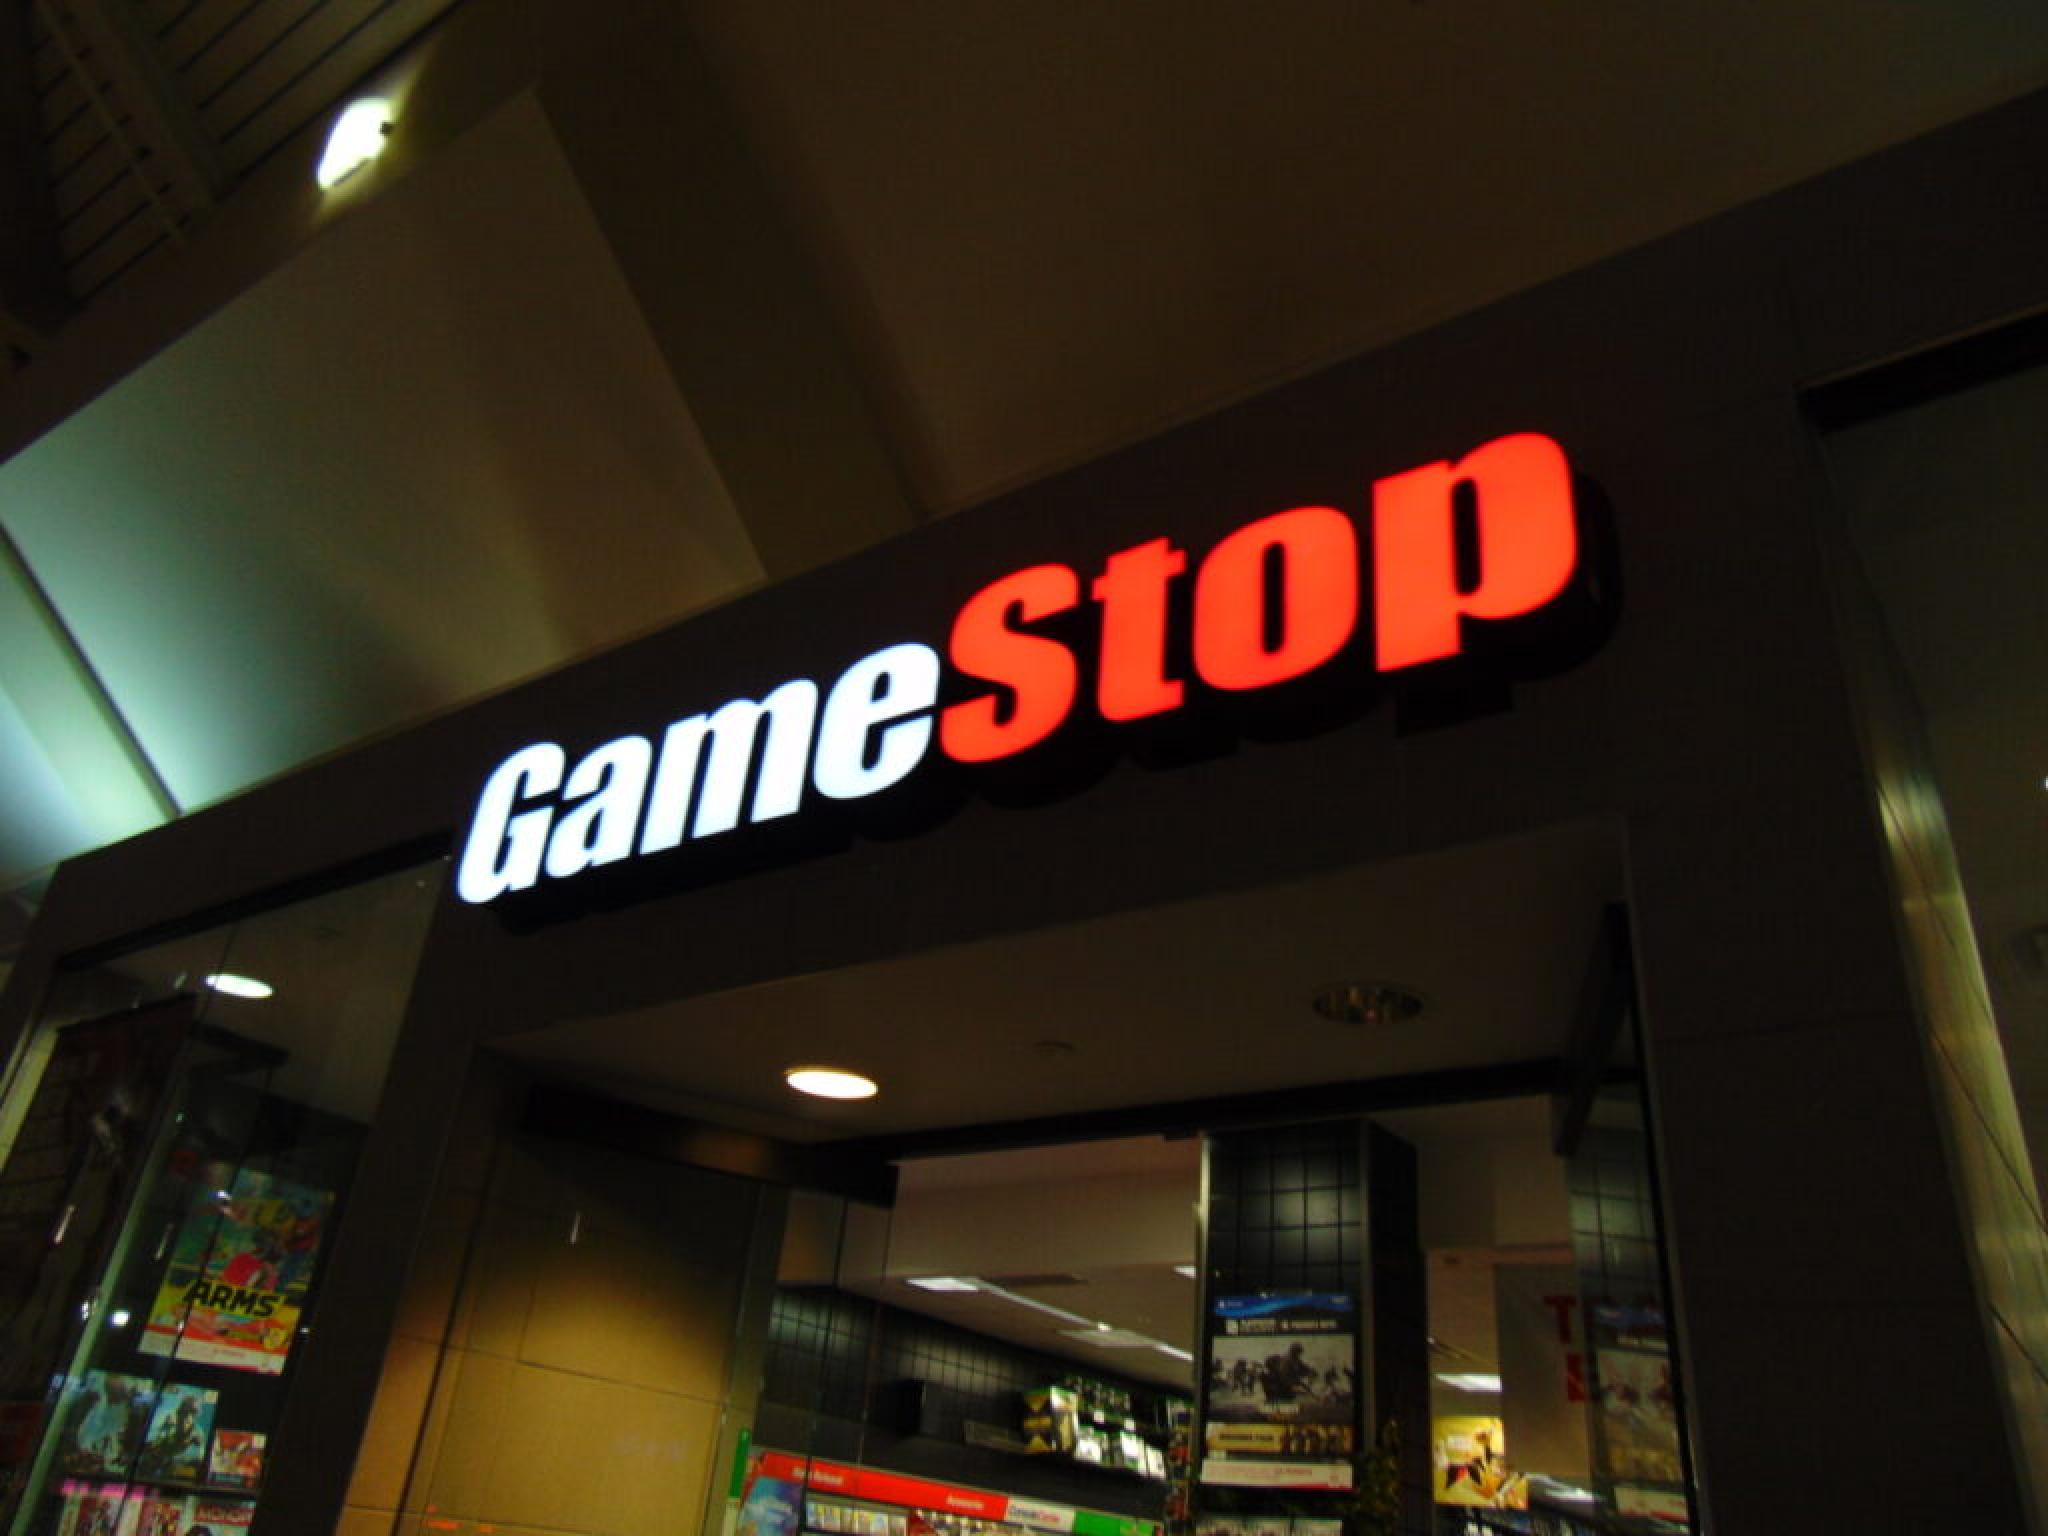  gamestop-runway-narrows-after-q4-results-we-expect-the-companys-demise-at-some-point-later-this-decade 